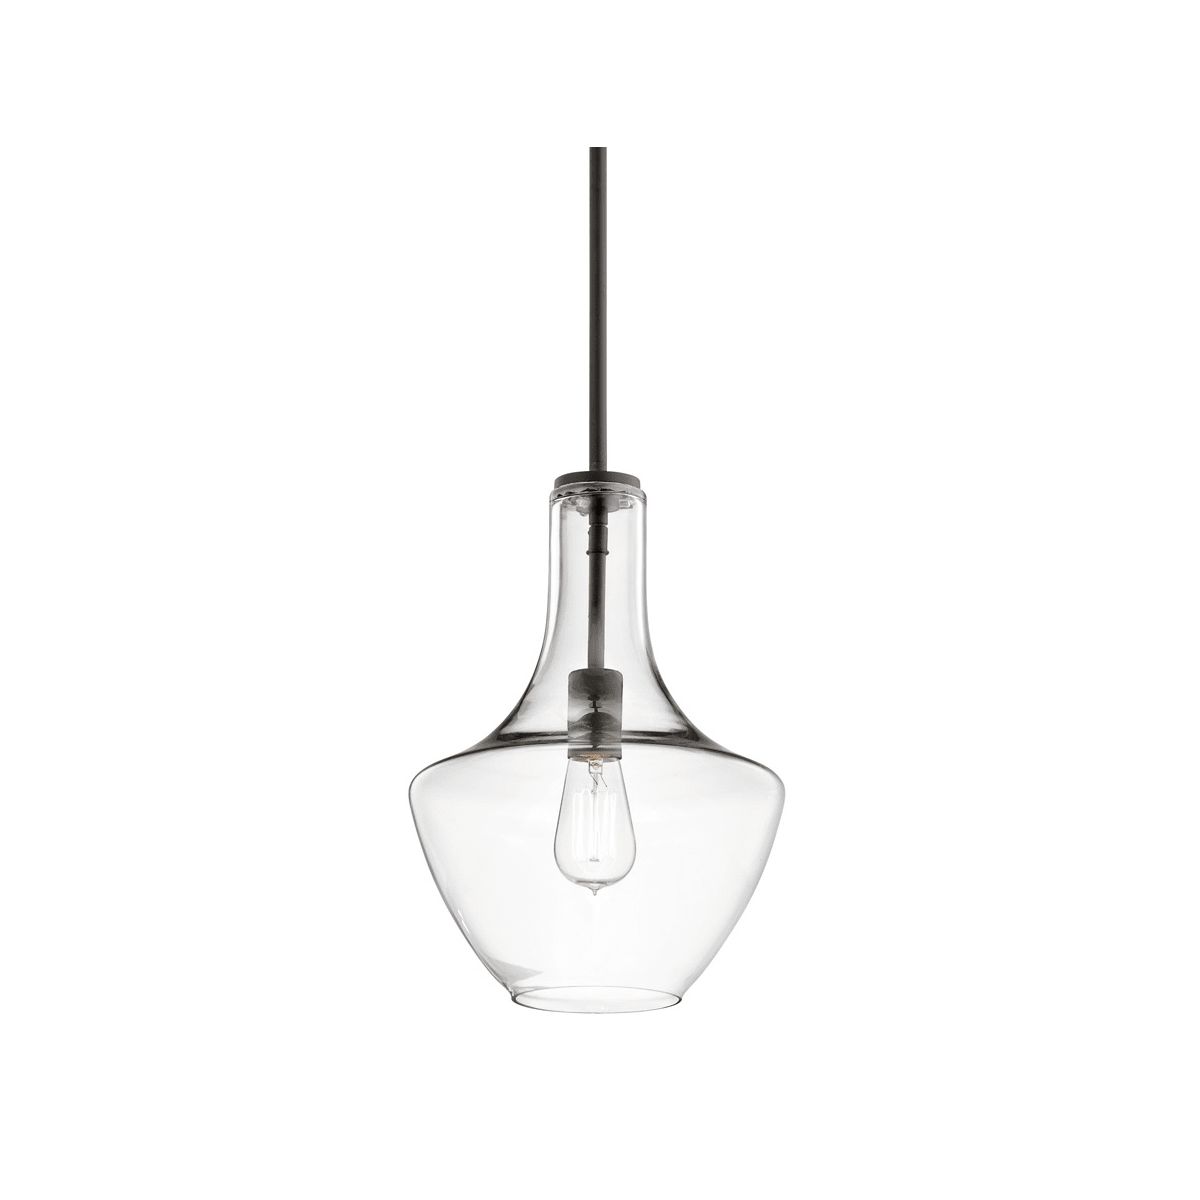 Everly 11" Wide Pendant with Clear Glass Shade | Build.com, Inc.